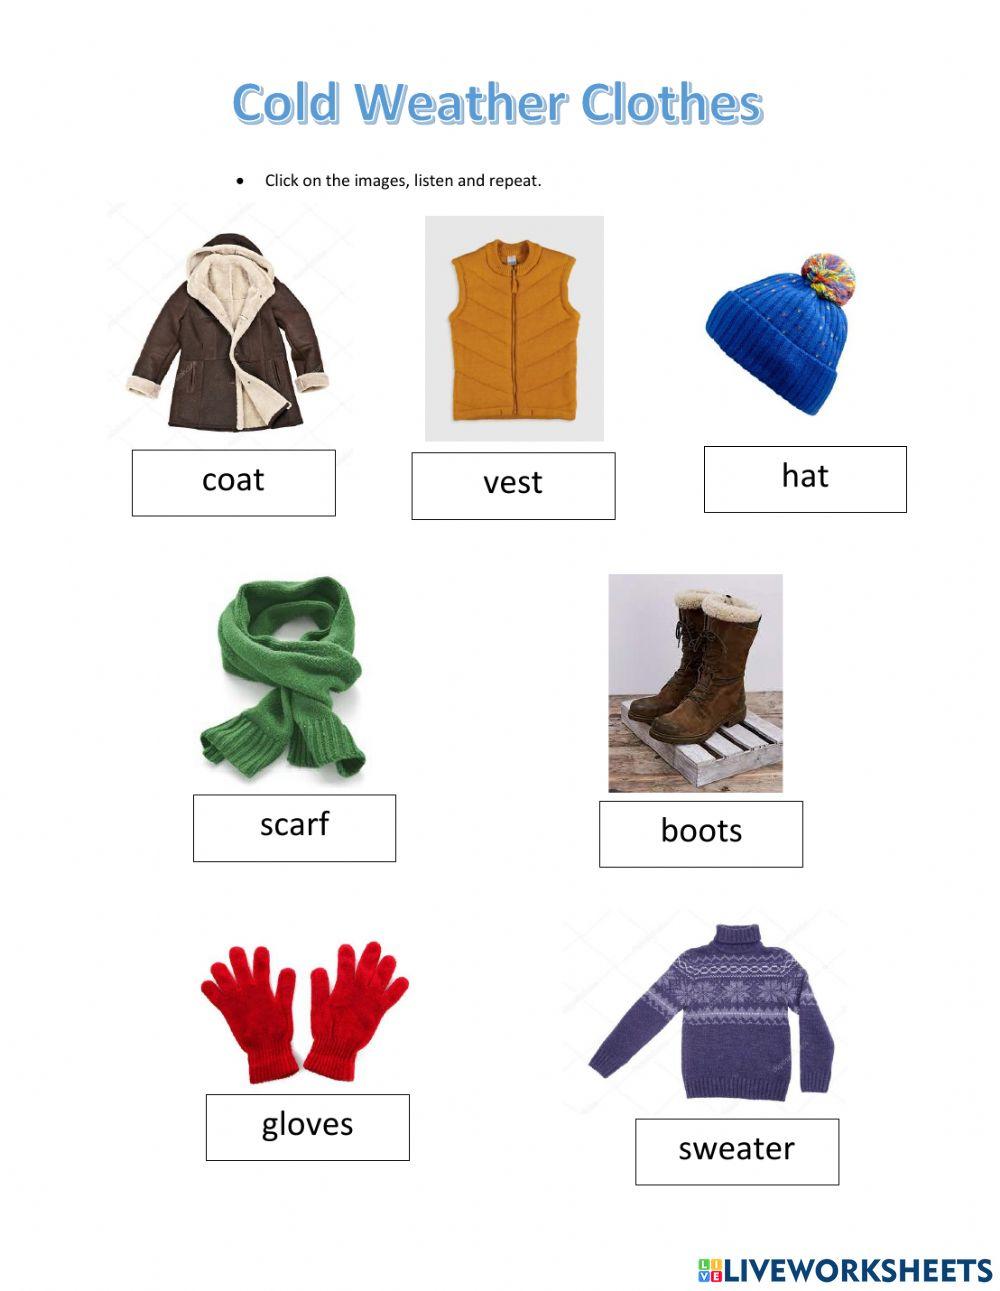 Cold weather clothes worksheet